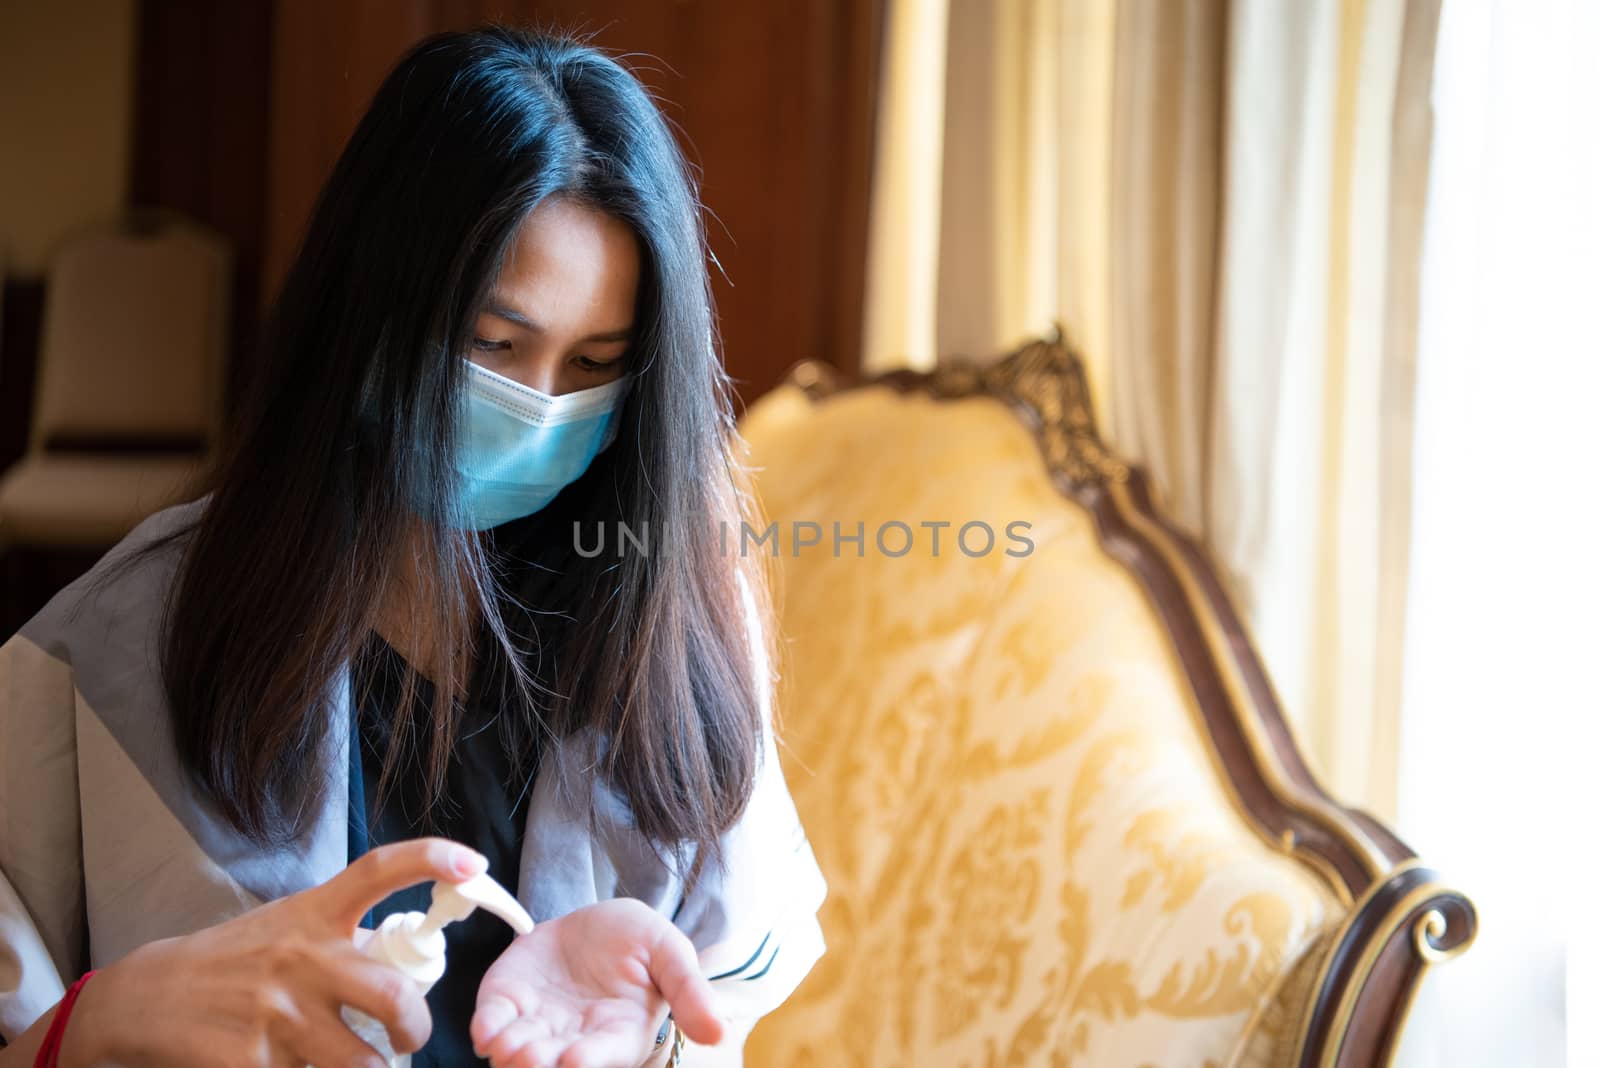 Asian woman wearing mask and alcohol antibacterial hand gel respiratory protection mask against epidemic flu covid19 or corona virus with fear emotion in concept illness, outbreak, healthcare in life